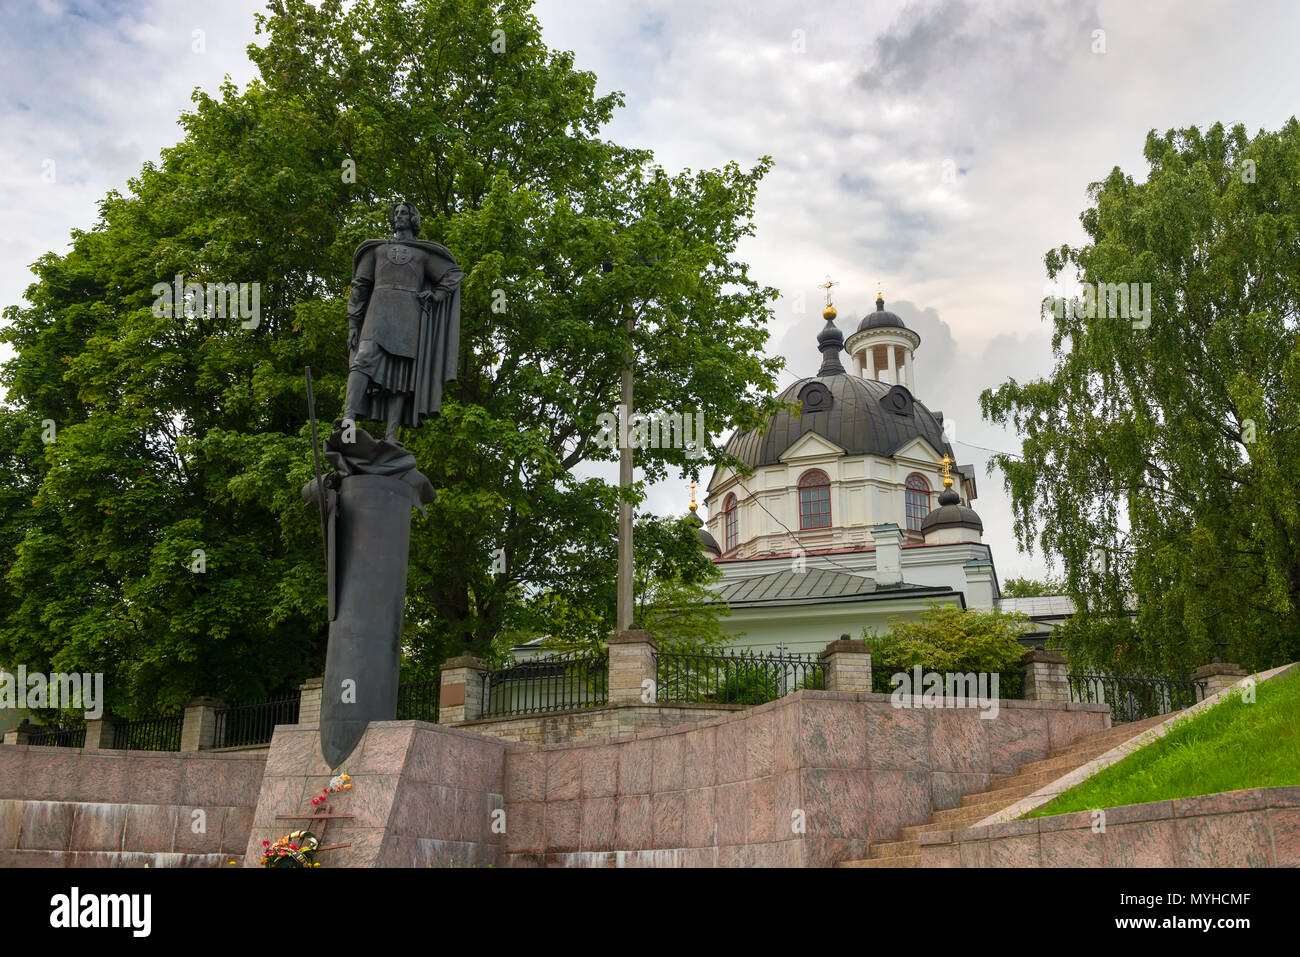 UST-IZHORA, SAINT PETERSBURG, RUSSIA - AUGUST 21, 2017: The monument to Alexander Nevsky at the site of the Neva battle Stock Photo